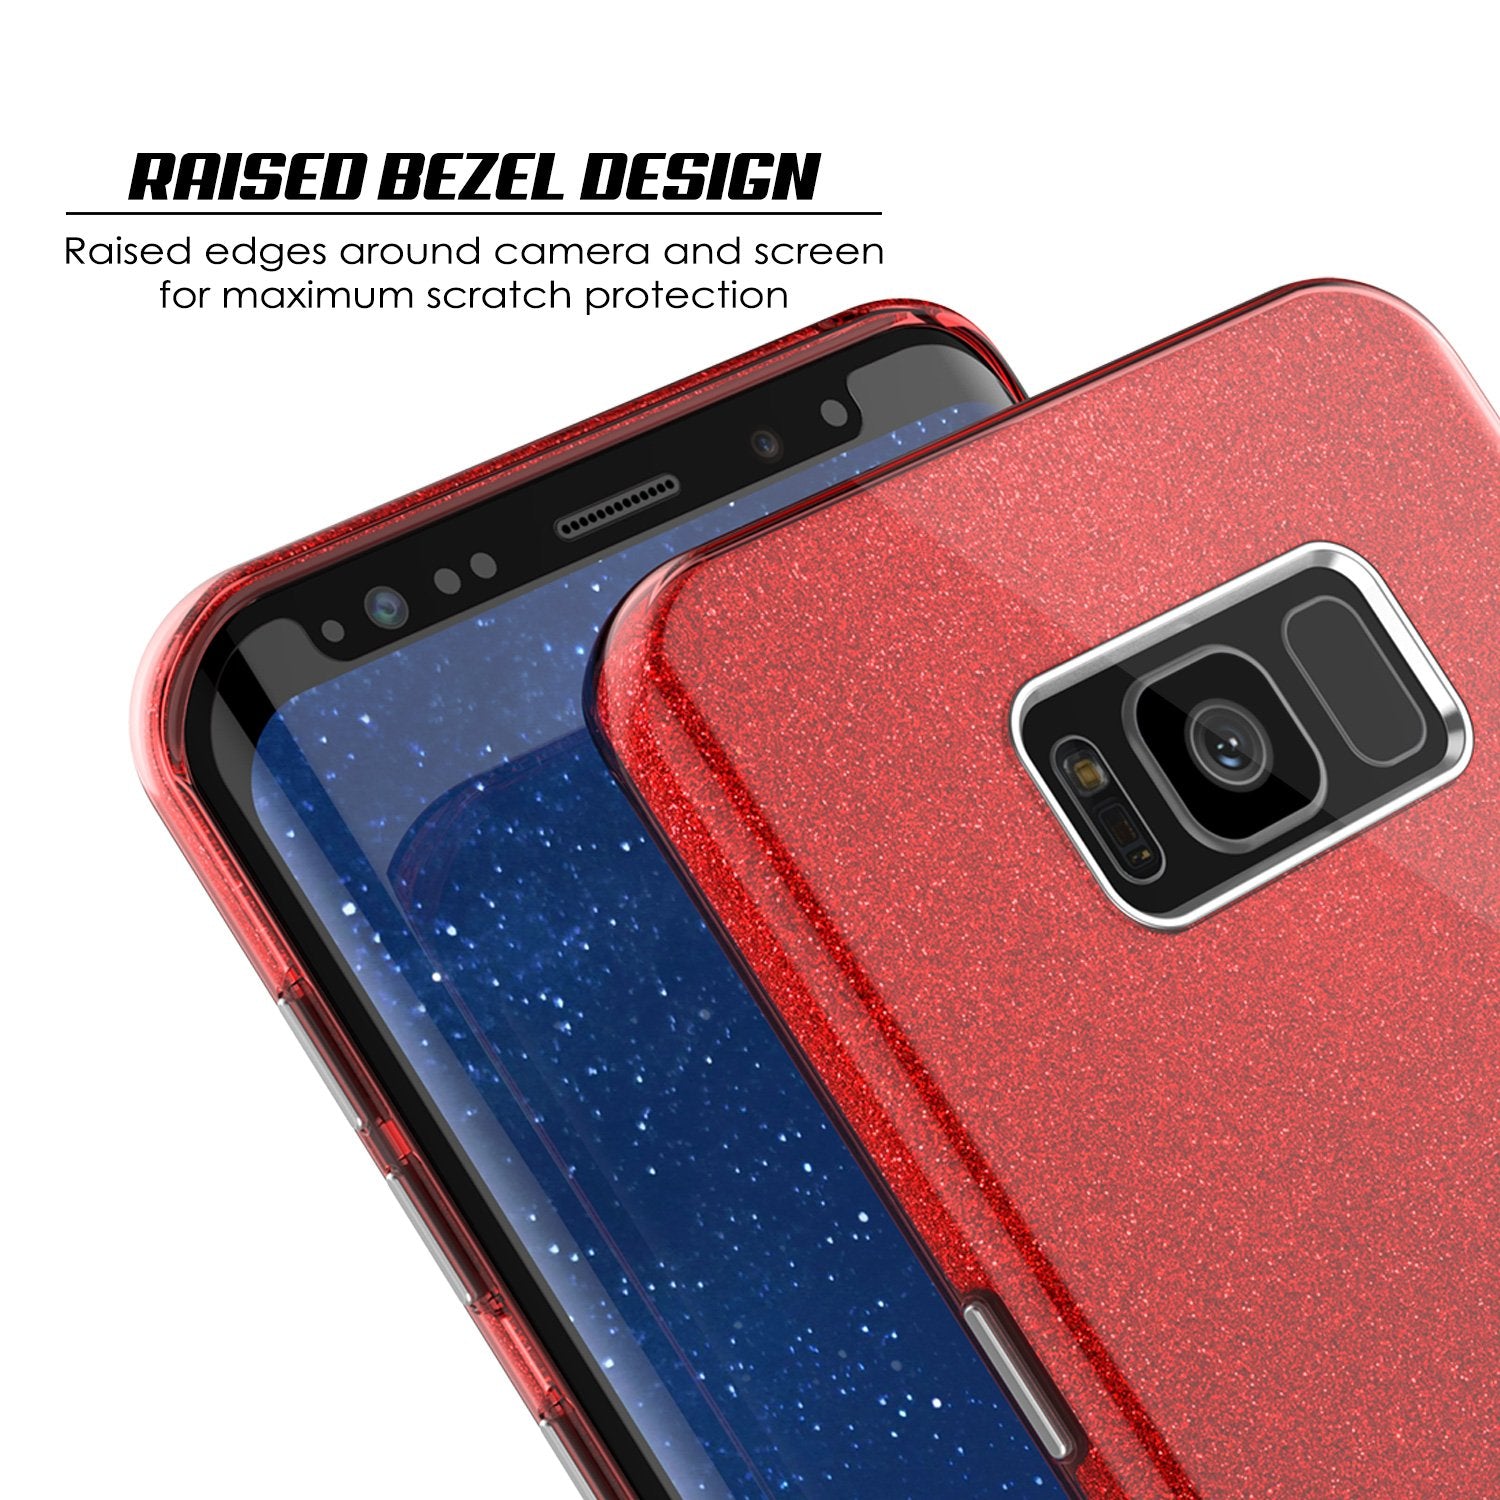 Galaxy S8 Case, Punkcase Galactic 2.0 Series Ultra Slim Protective Armor TPU Cover w/ PunkShield Screen Protector | Lifetime Exchange Warranty | Designed for Samsung Galaxy S8 [Red] - PunkCase NZ